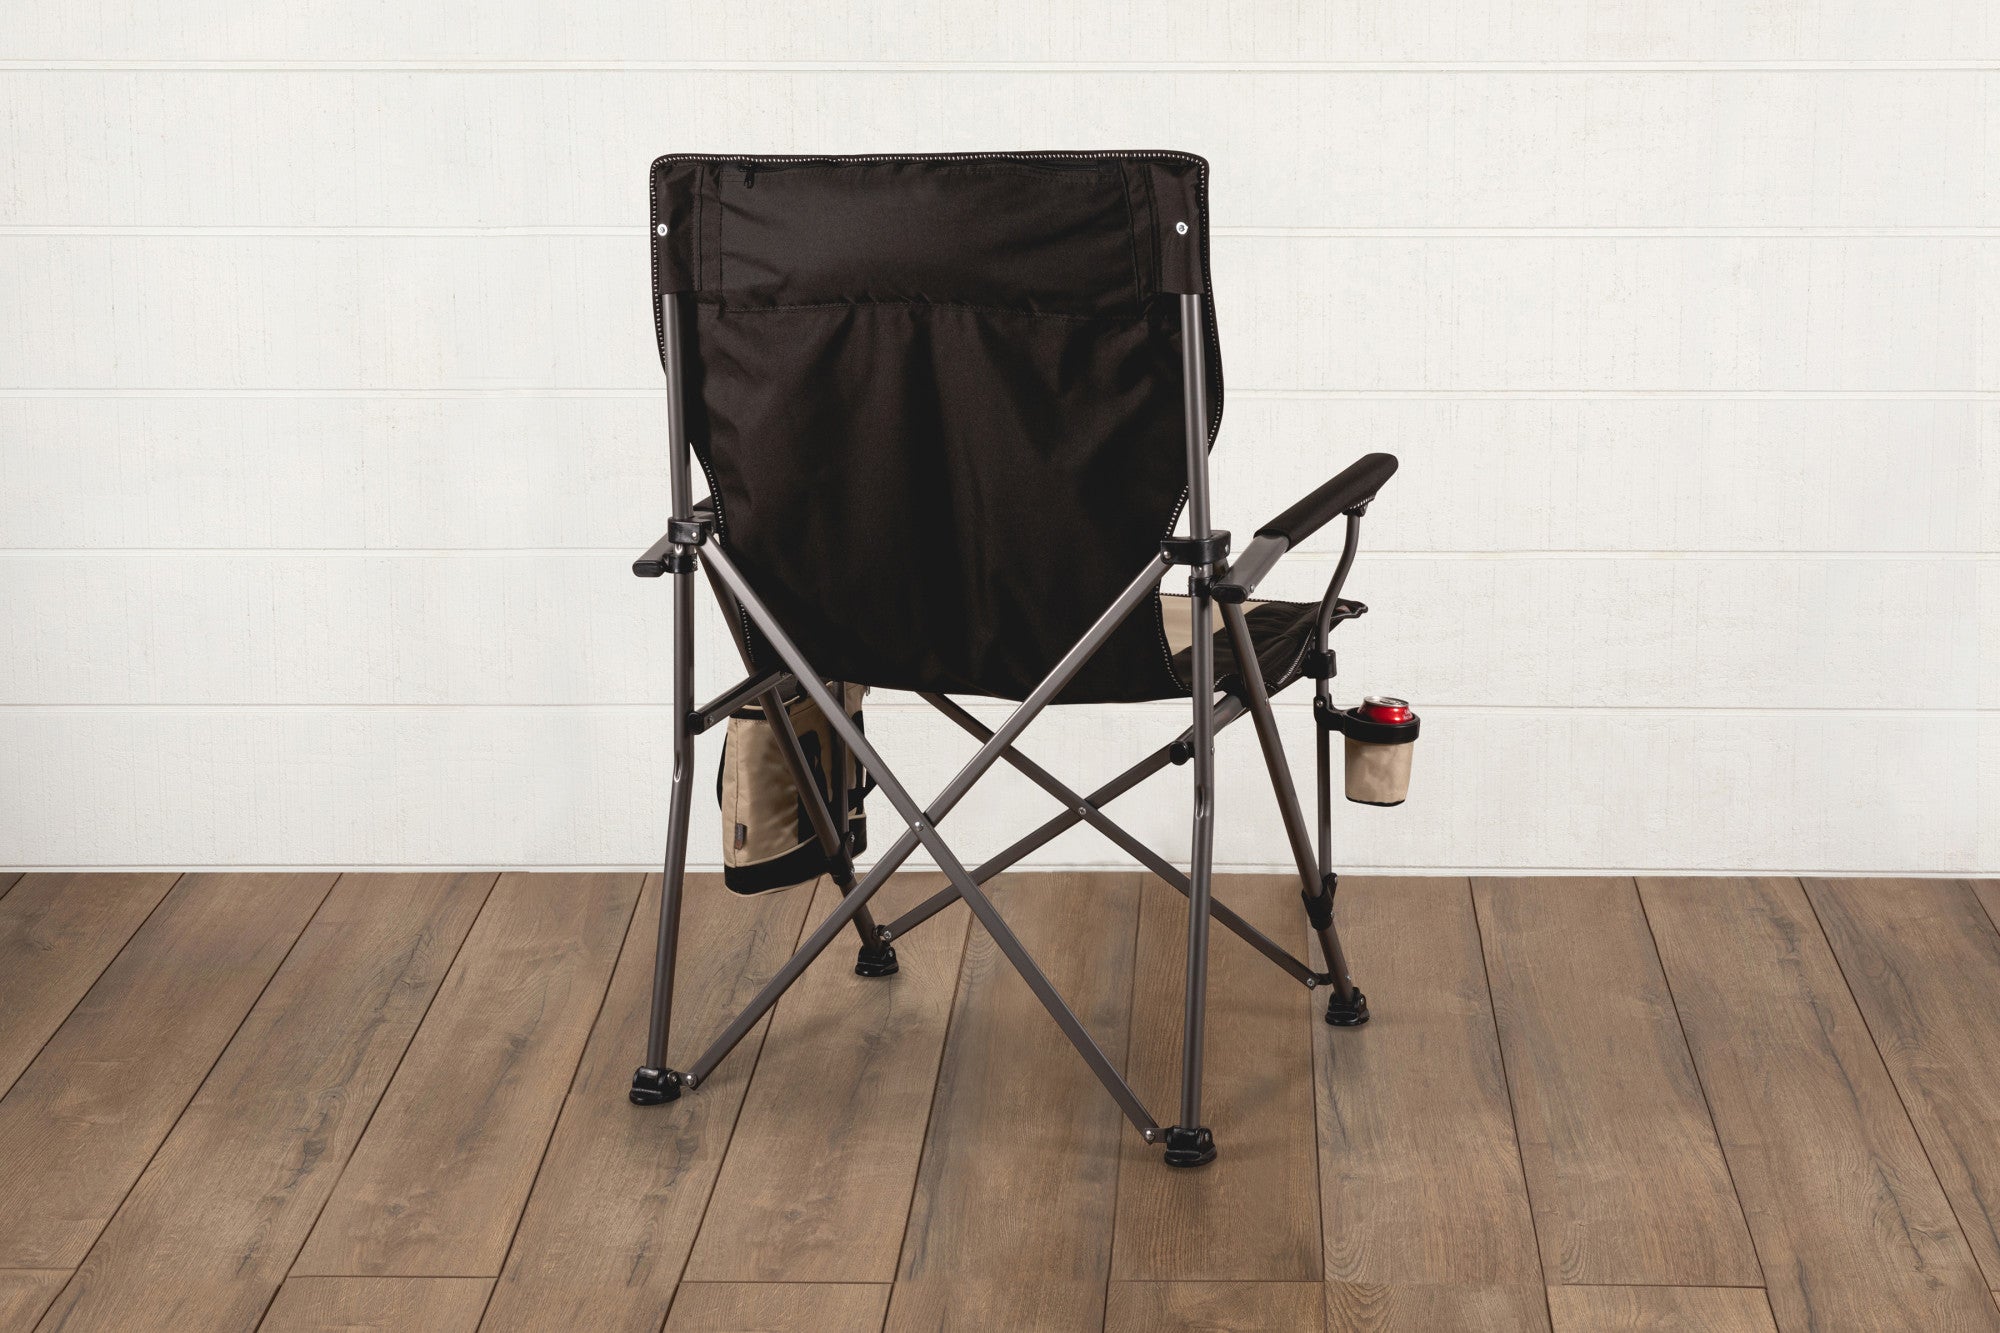 Los Angeles Rams - Big Bear XXL Camping Chair with Cooler